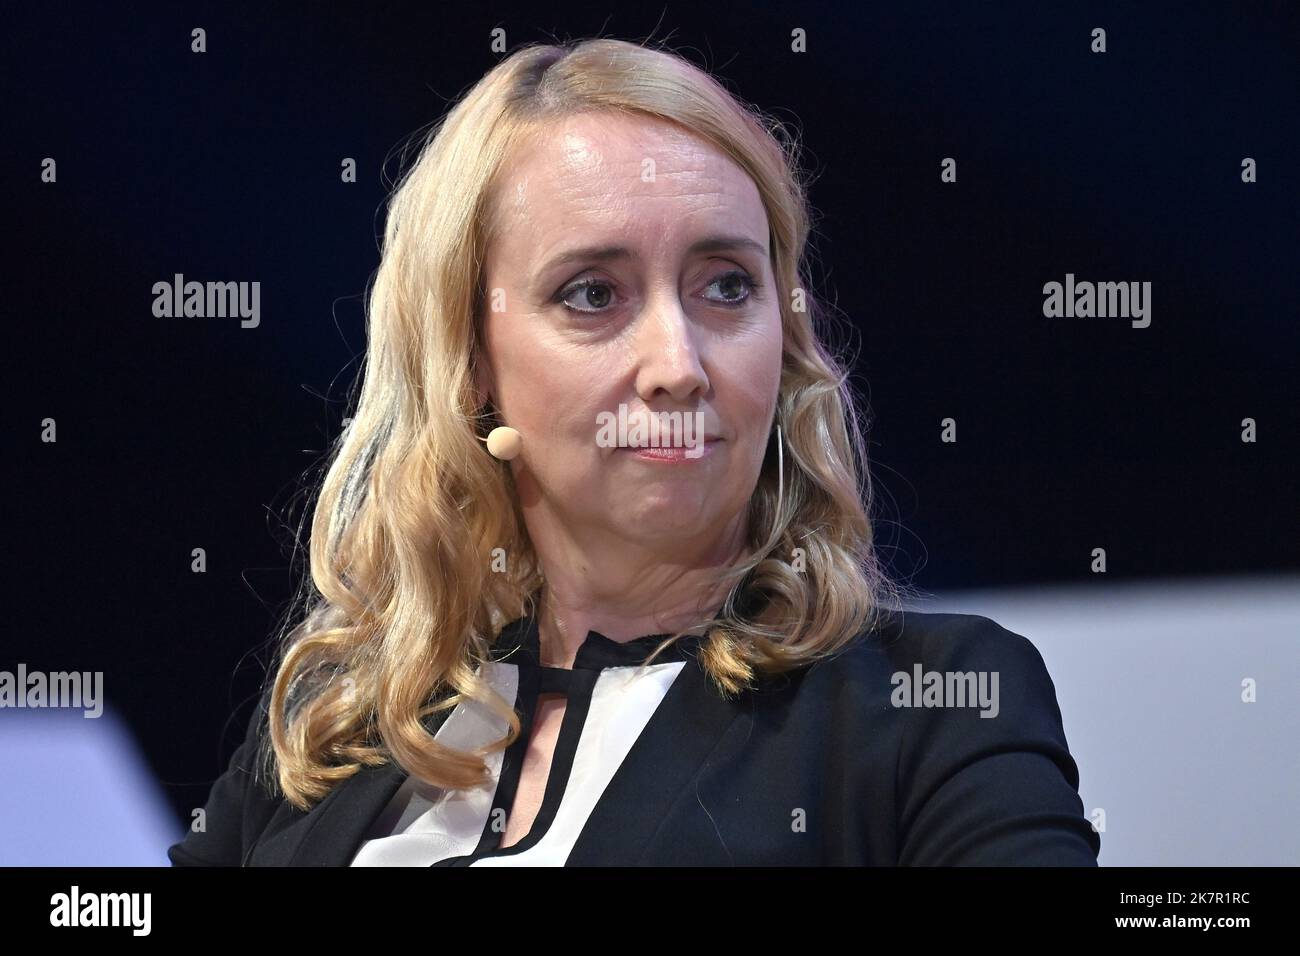 Melanie amann hi-res stock photography and images - Alamy